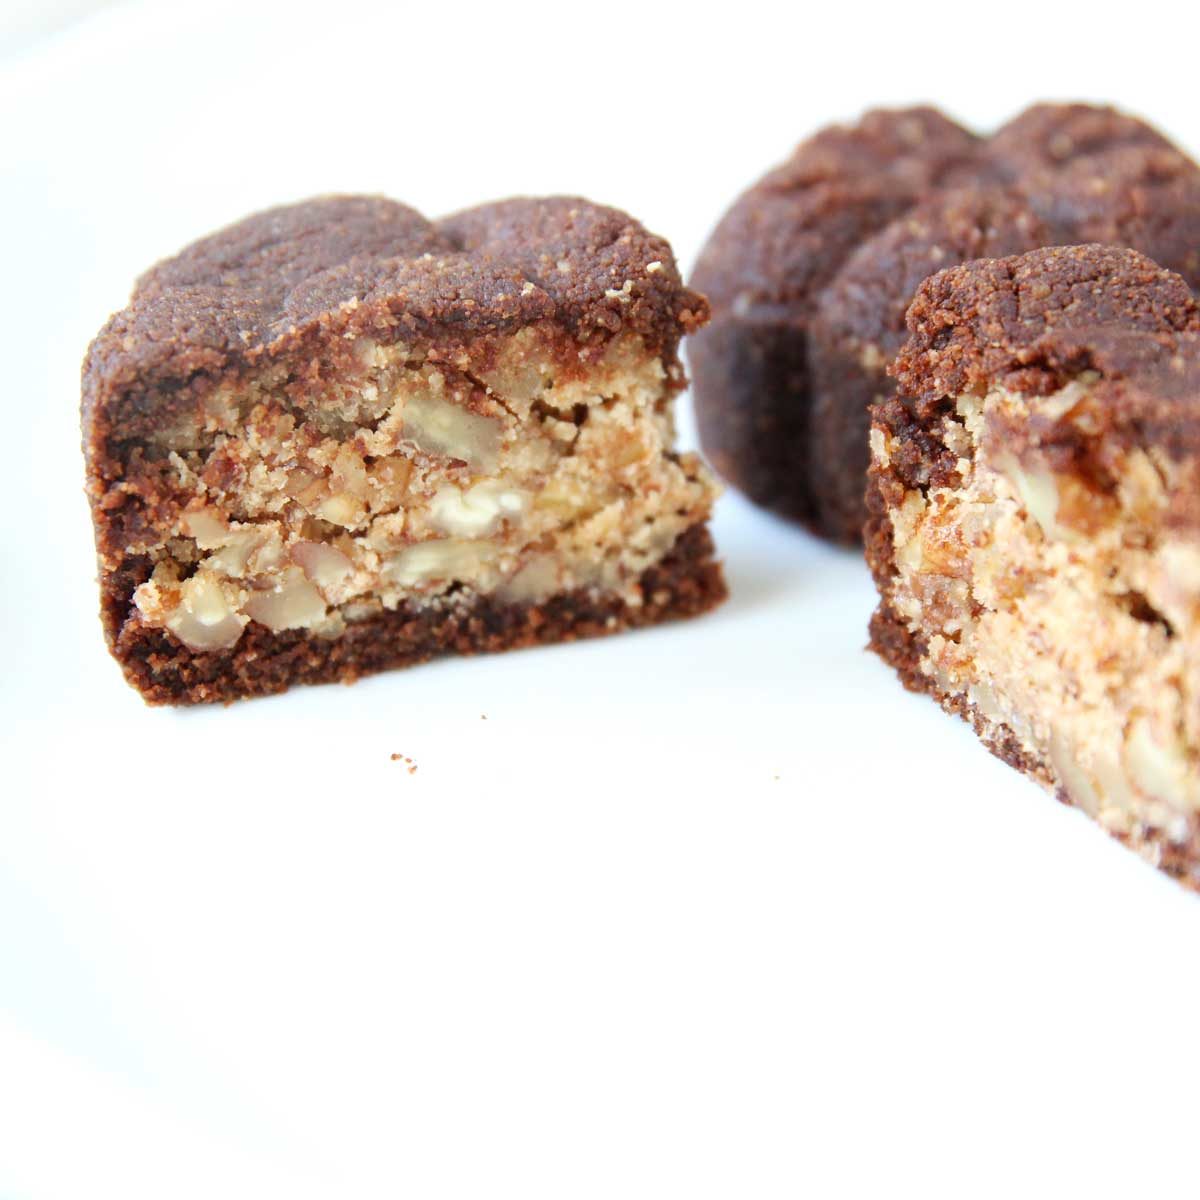 Chocolate Mooncakes with Sweet Nut Filling (Paleo, Gluten-Free Recipe) - chocolate mooncakes